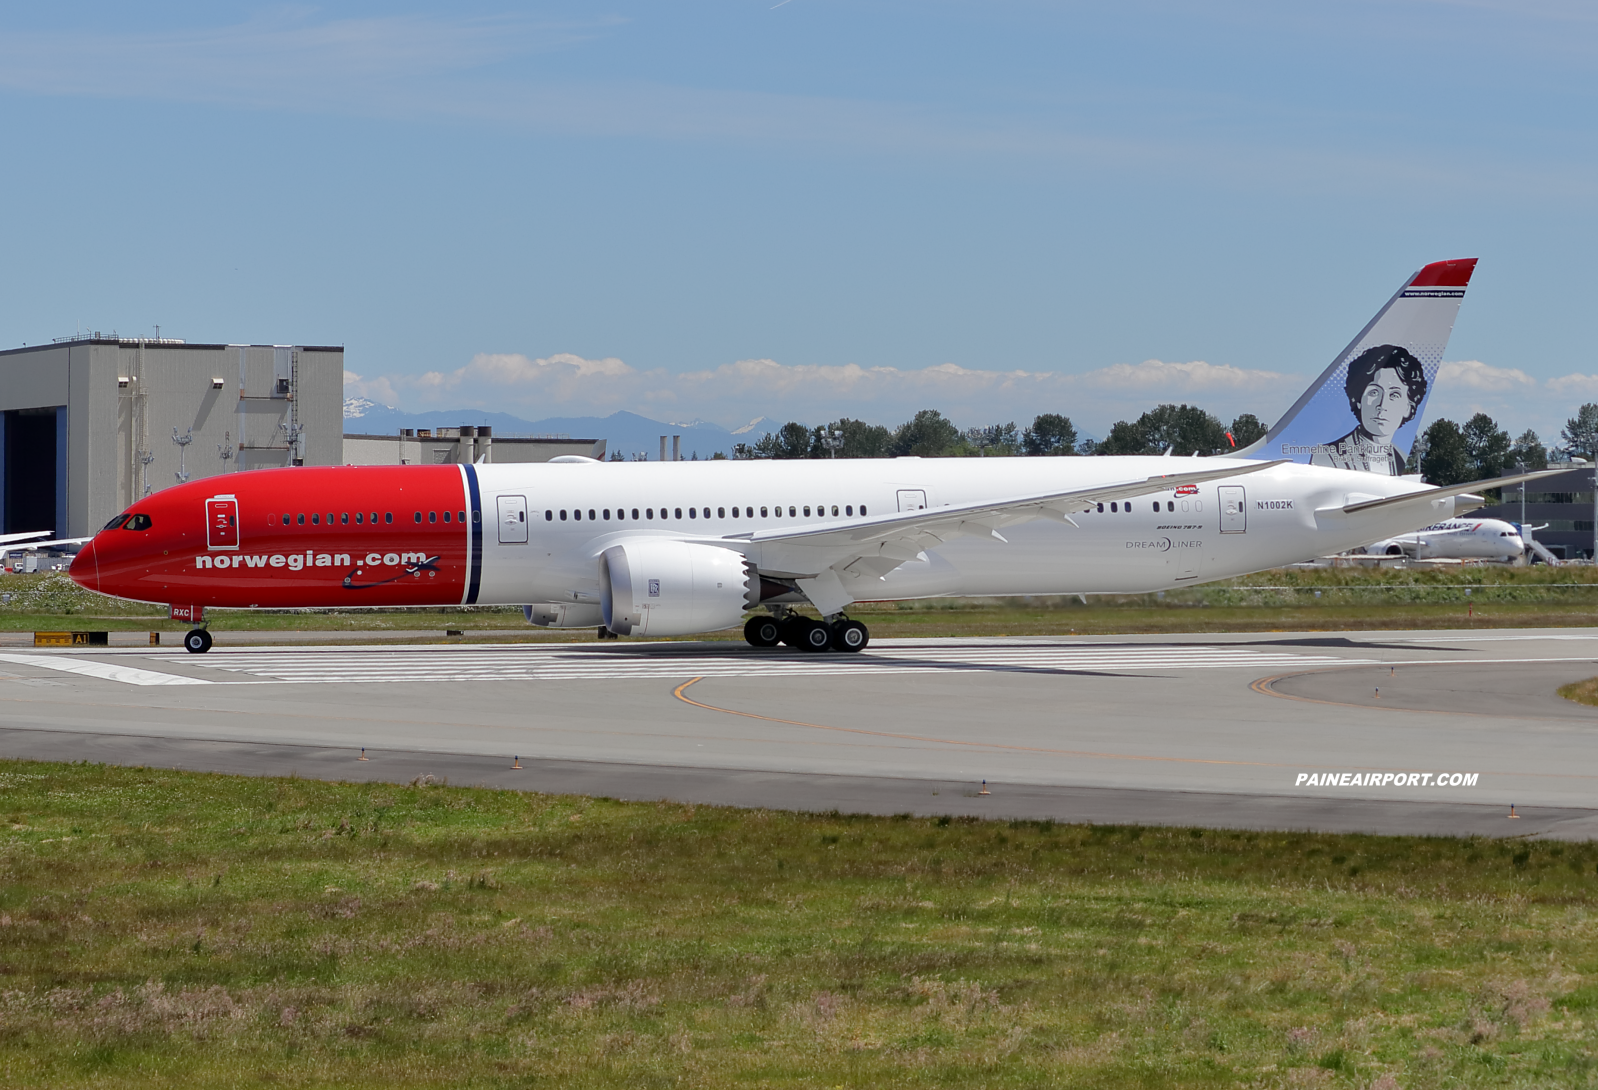 Norwegian 787-9 SE-RXC at KPAE Paine Field